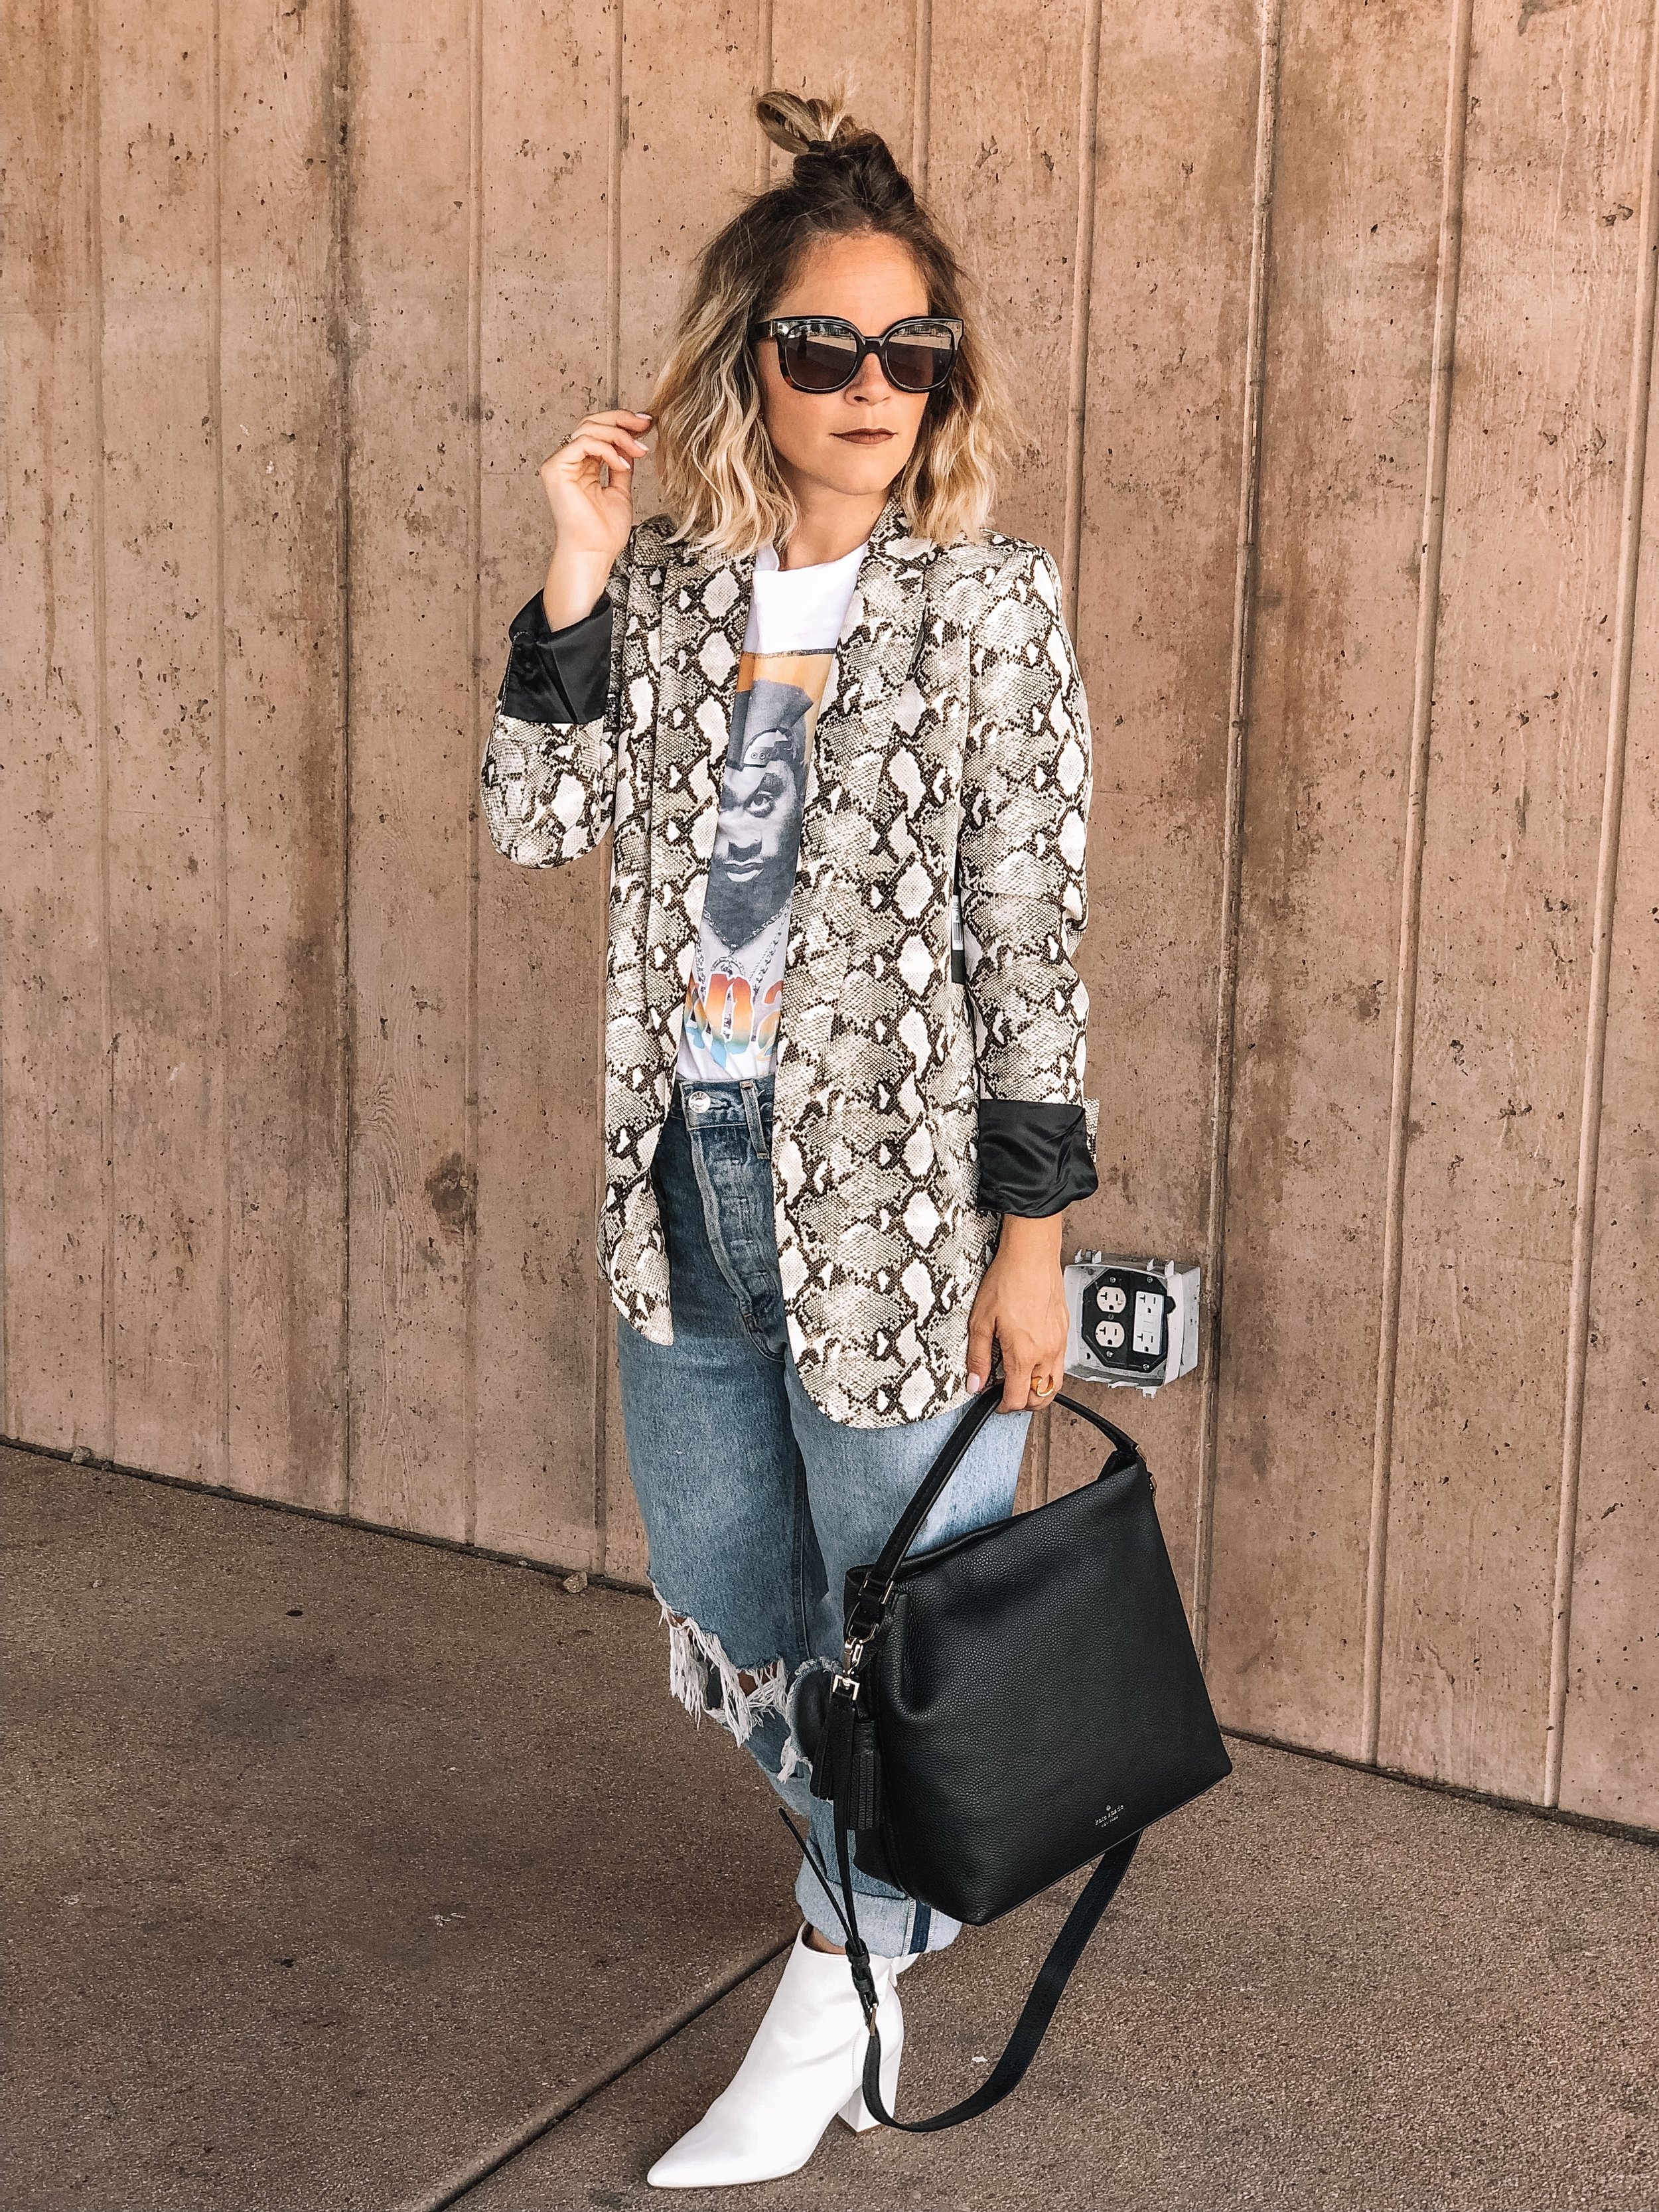 Top Las Vegas fashion blog, Life of a Sister, features their Favorite Fall Fashion from Las Vegas Premium Outlets North.